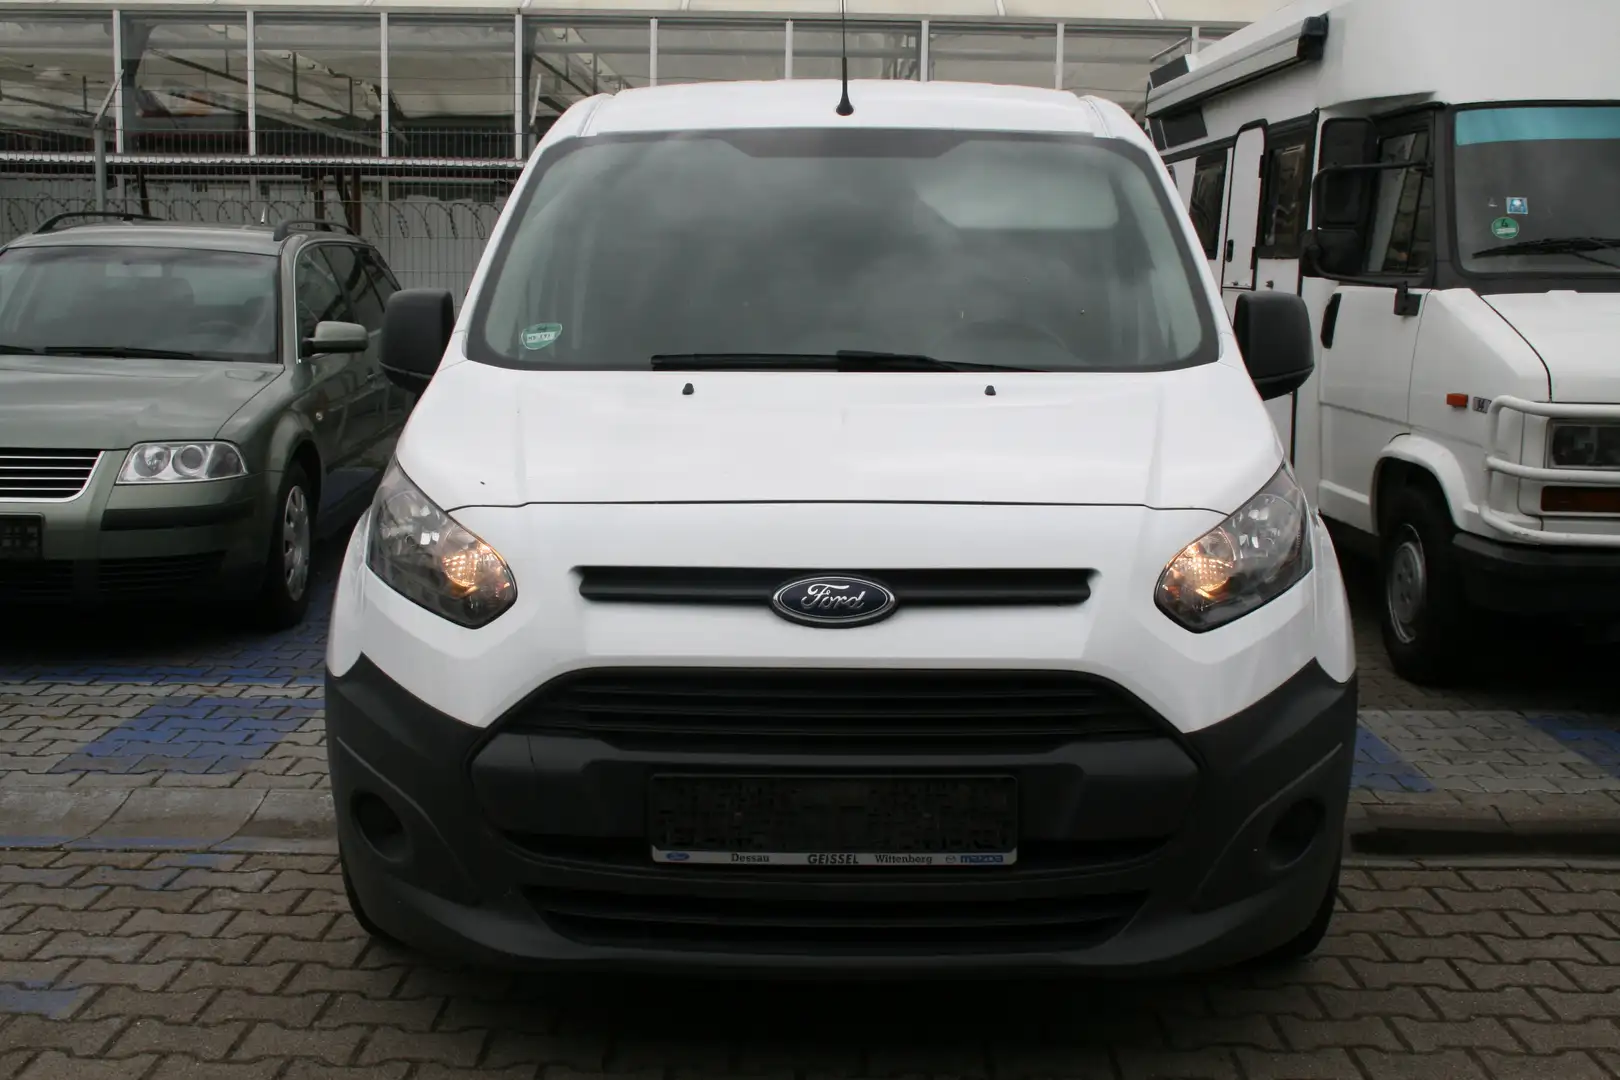 Ford Transit Connect Kasten lang (CHC) NETTO. 5671. € Weiß - 2